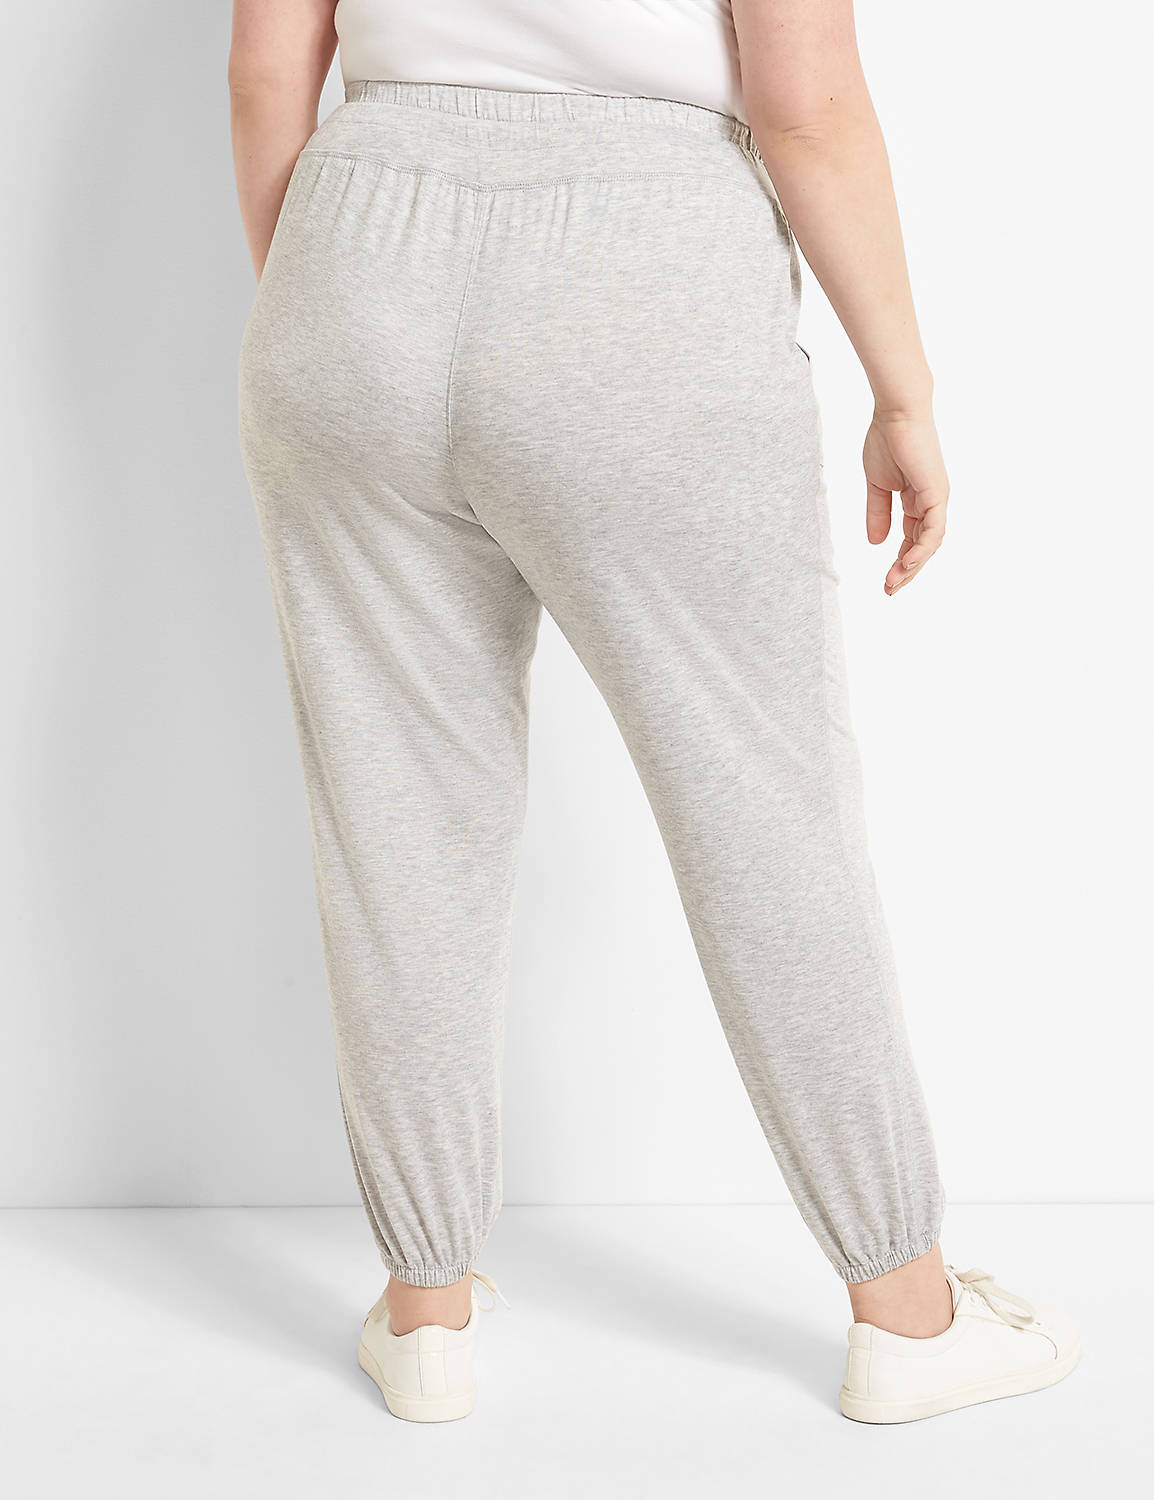 LIVI French Terry Jogger Product Image 2